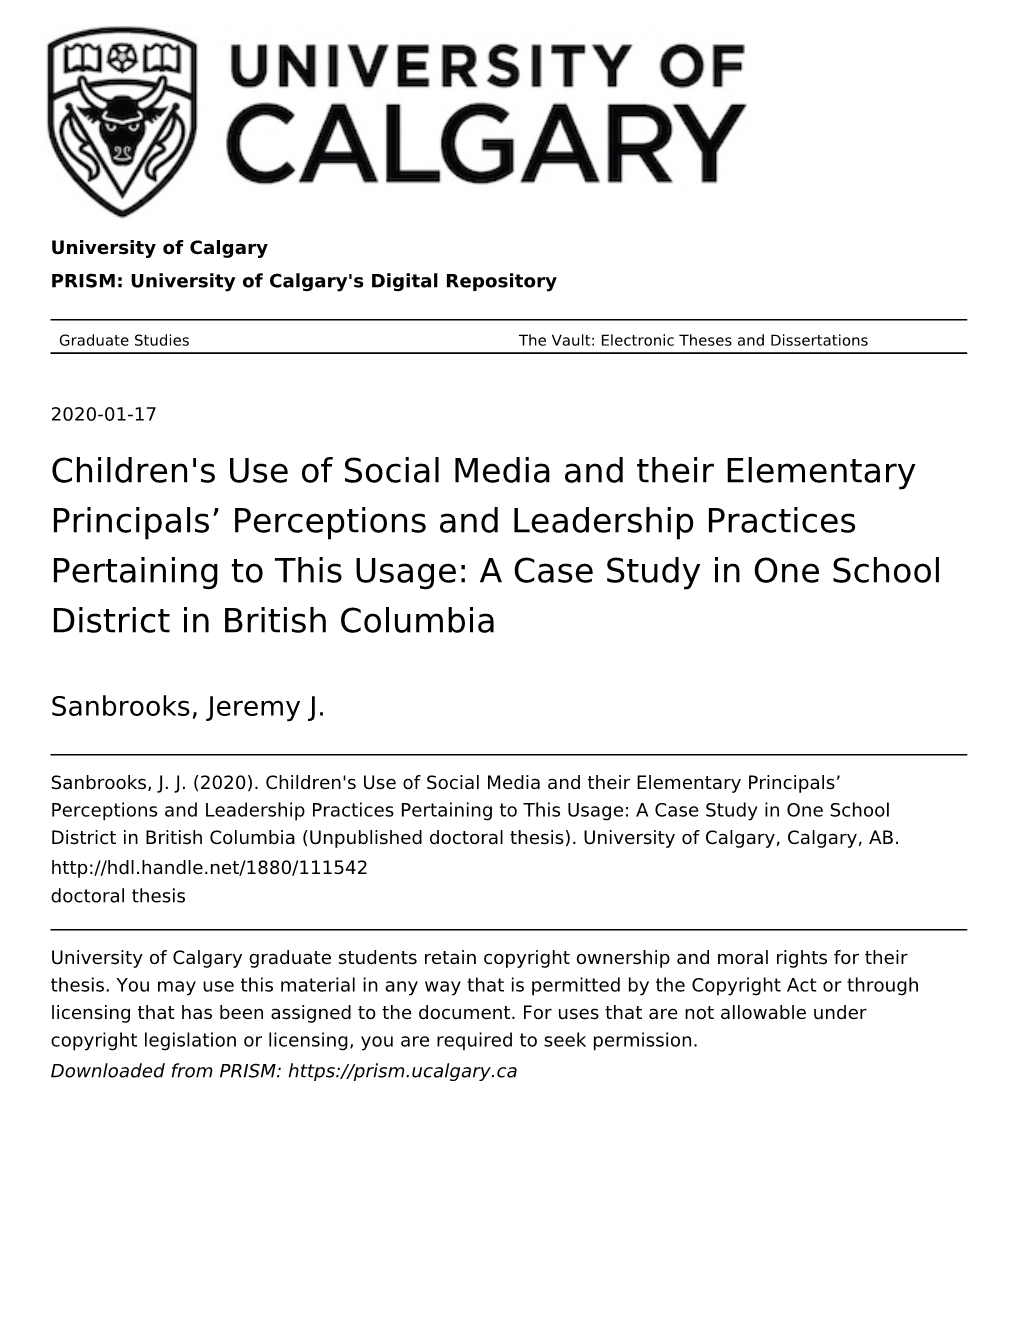 Children's Use of Social Media and Their Elementary Principals